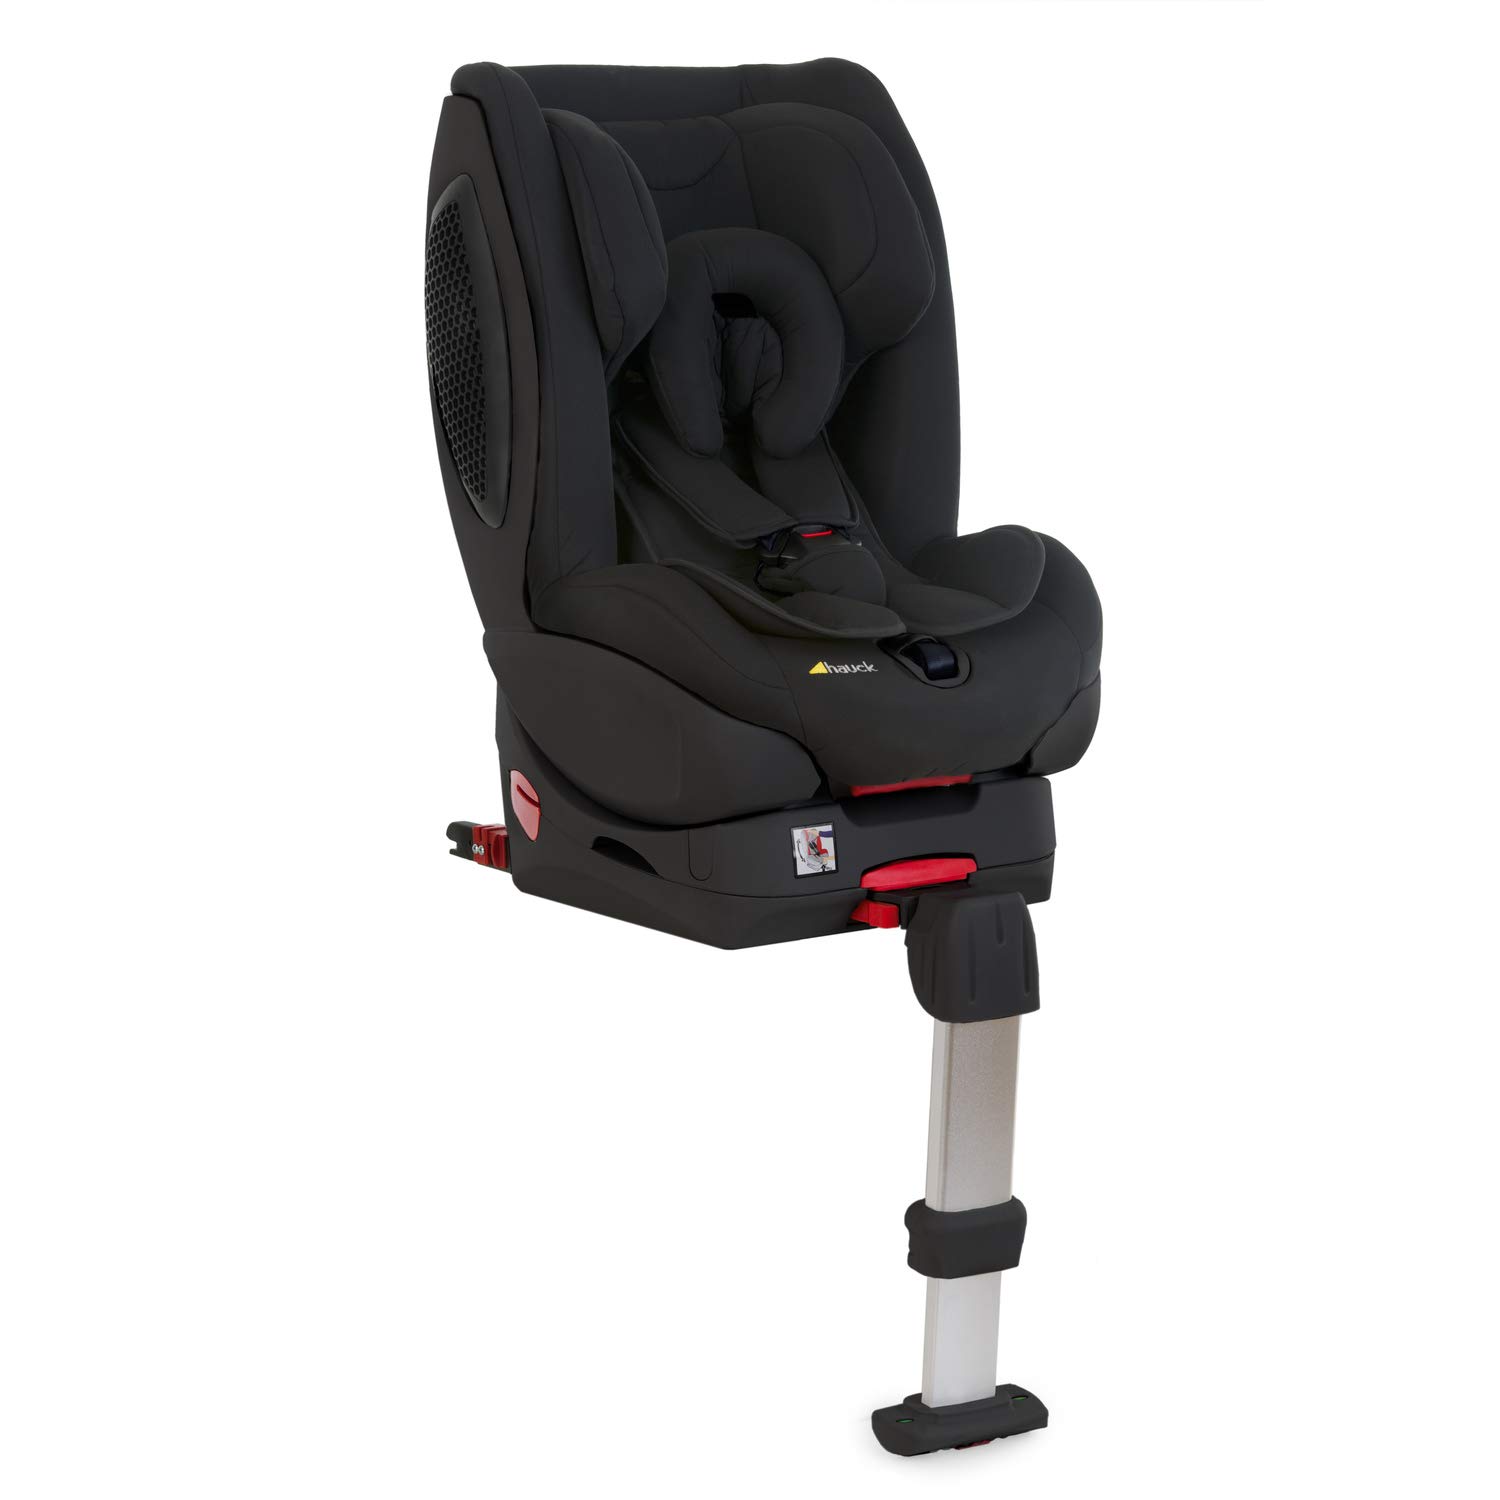 Hauck Reboard Car Seat with ISOFIX Station Varioguard Plus / Group 0 - 1 / Babies and Children from Birth up to 18 kg / ECE R44/04 / Adjustable Headrest / Adjustable Tilt / Black